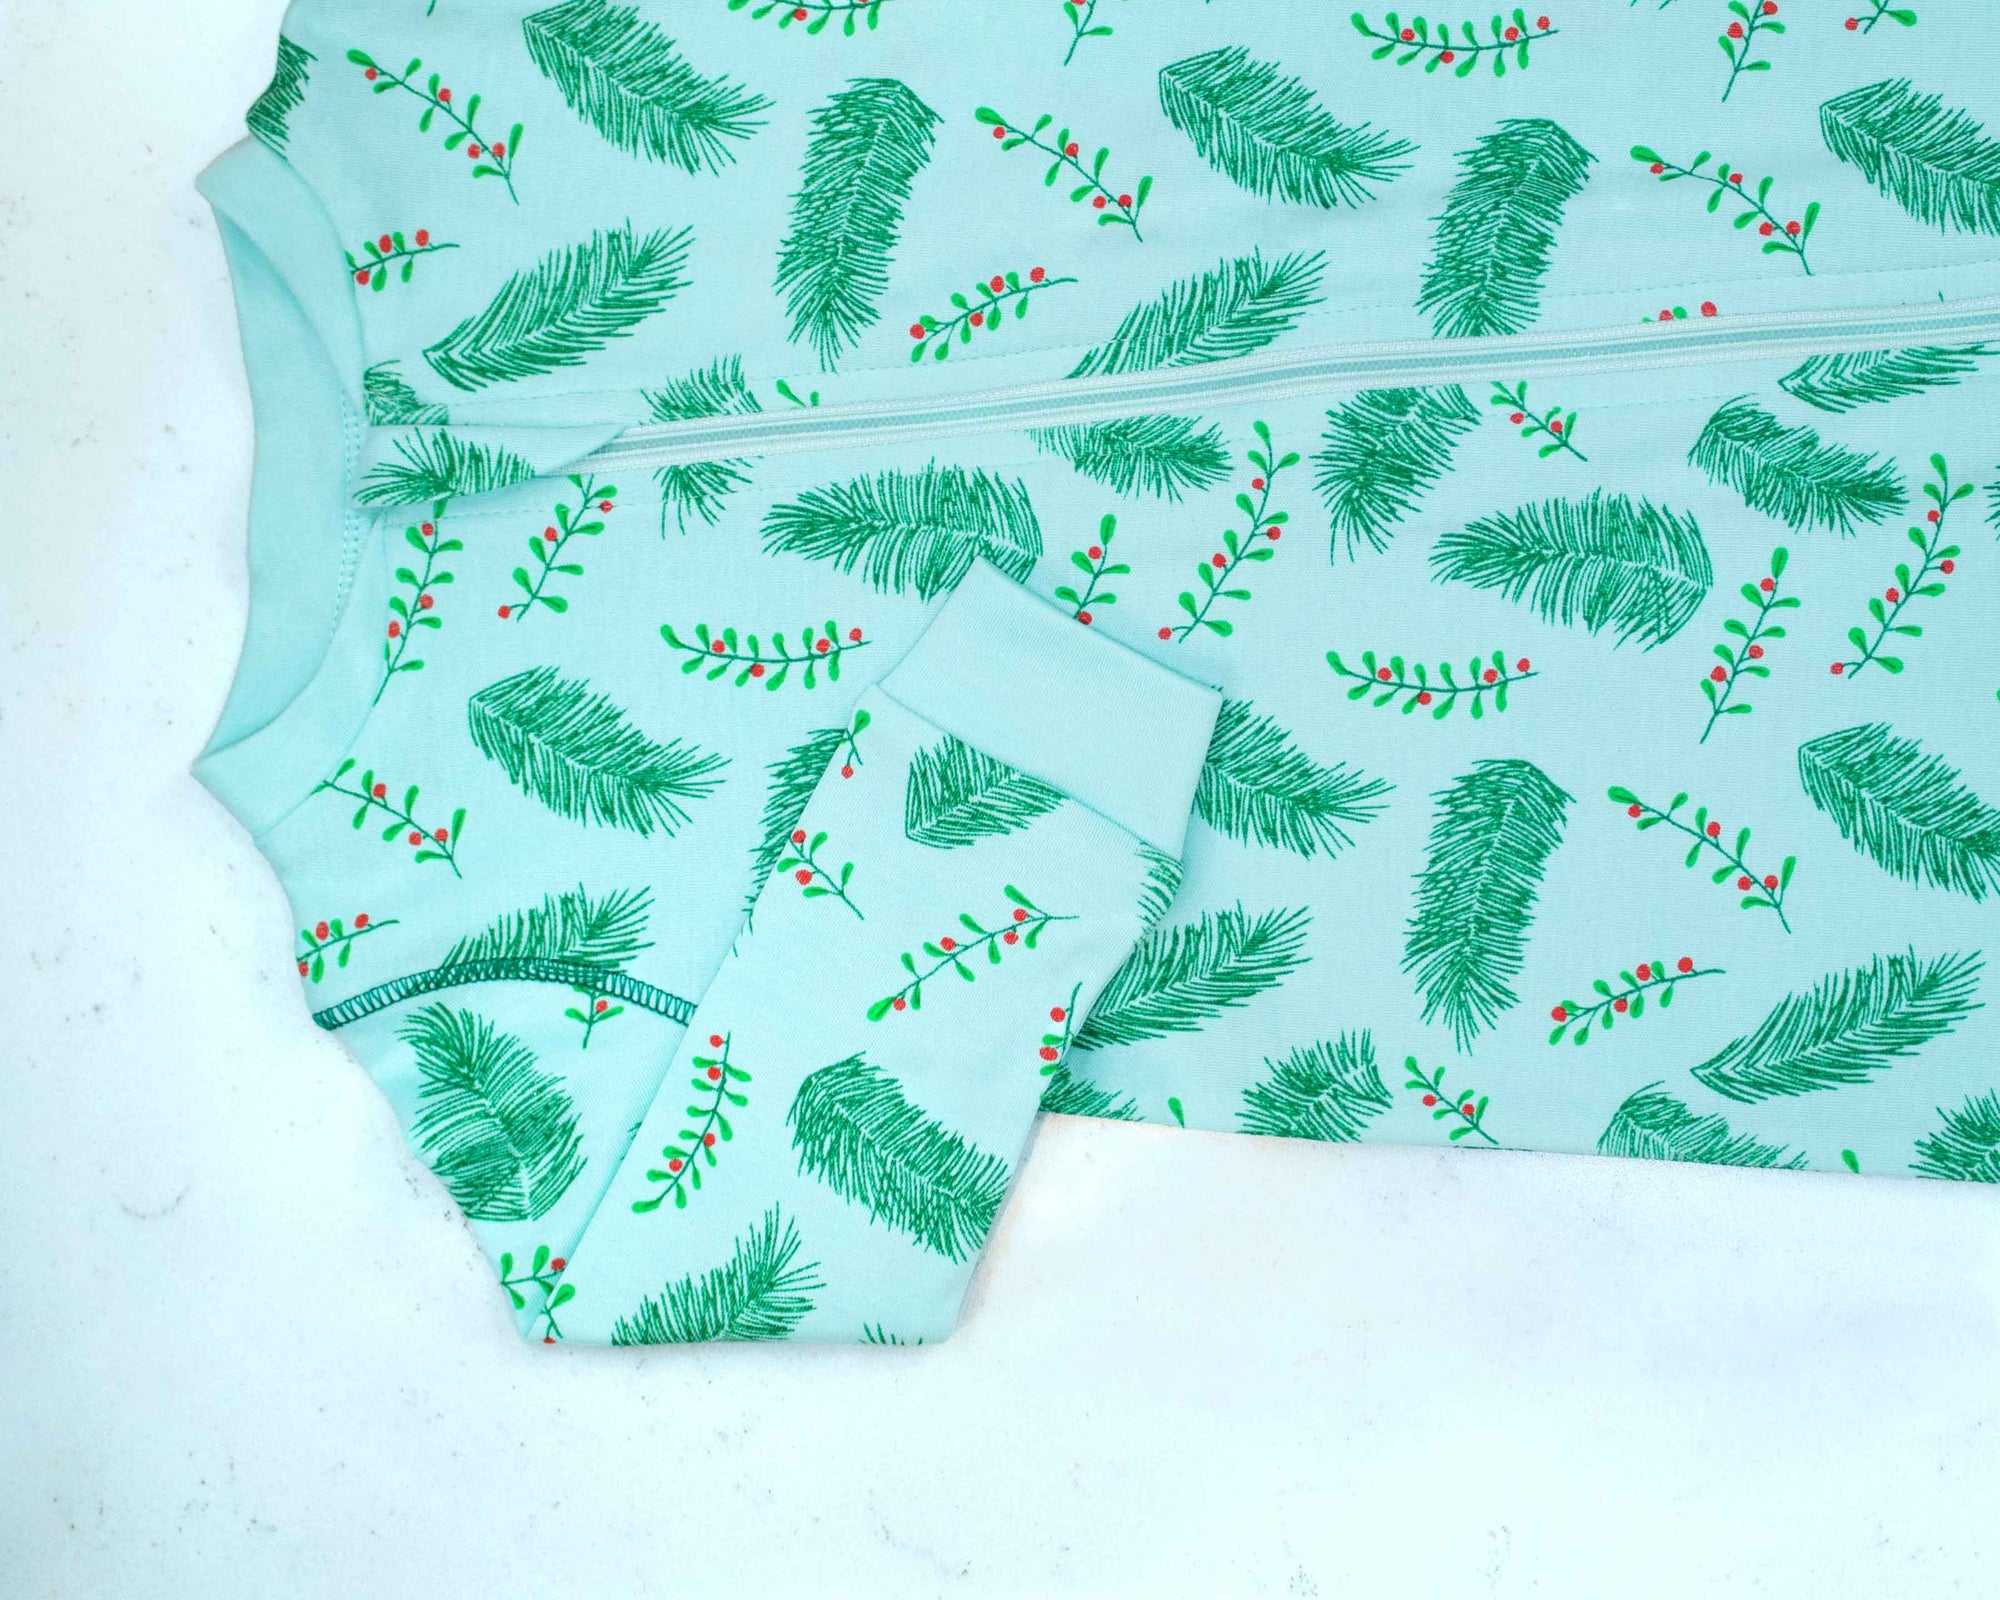 Detail of zipper area of light blue footed pajama with vintage Christmas holly pattern made in pima cotton